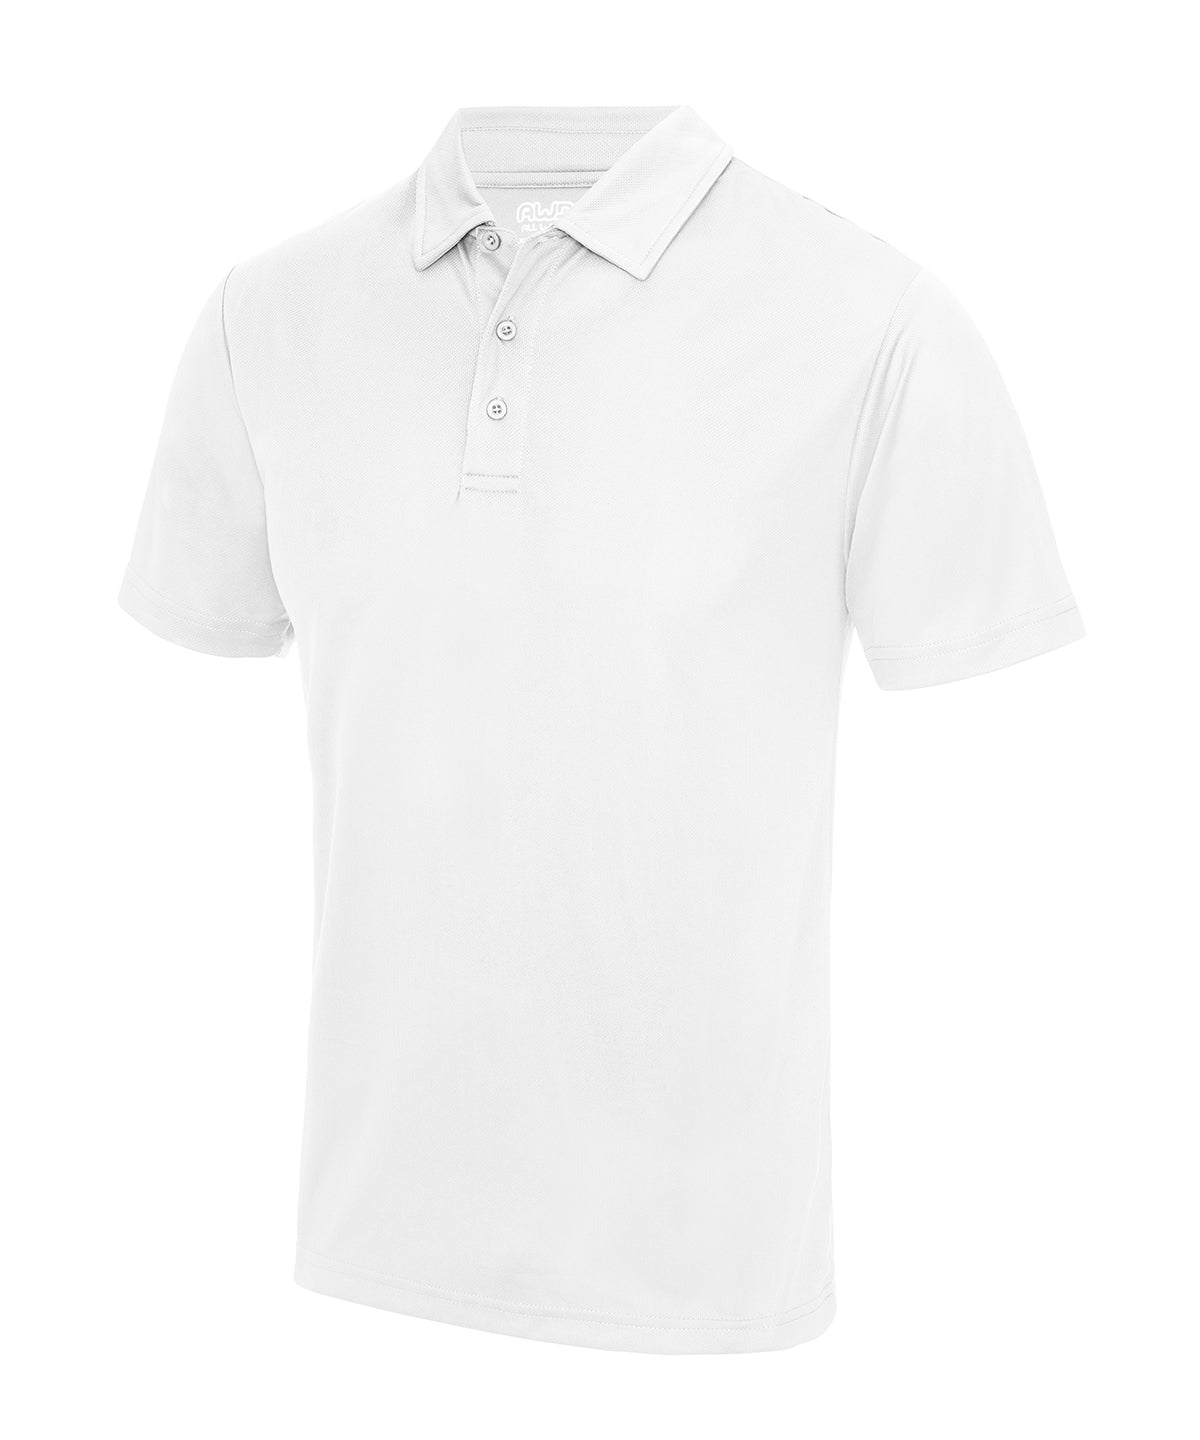 Personalised Polo Shirts - White AWDis Just Cool Cool polo